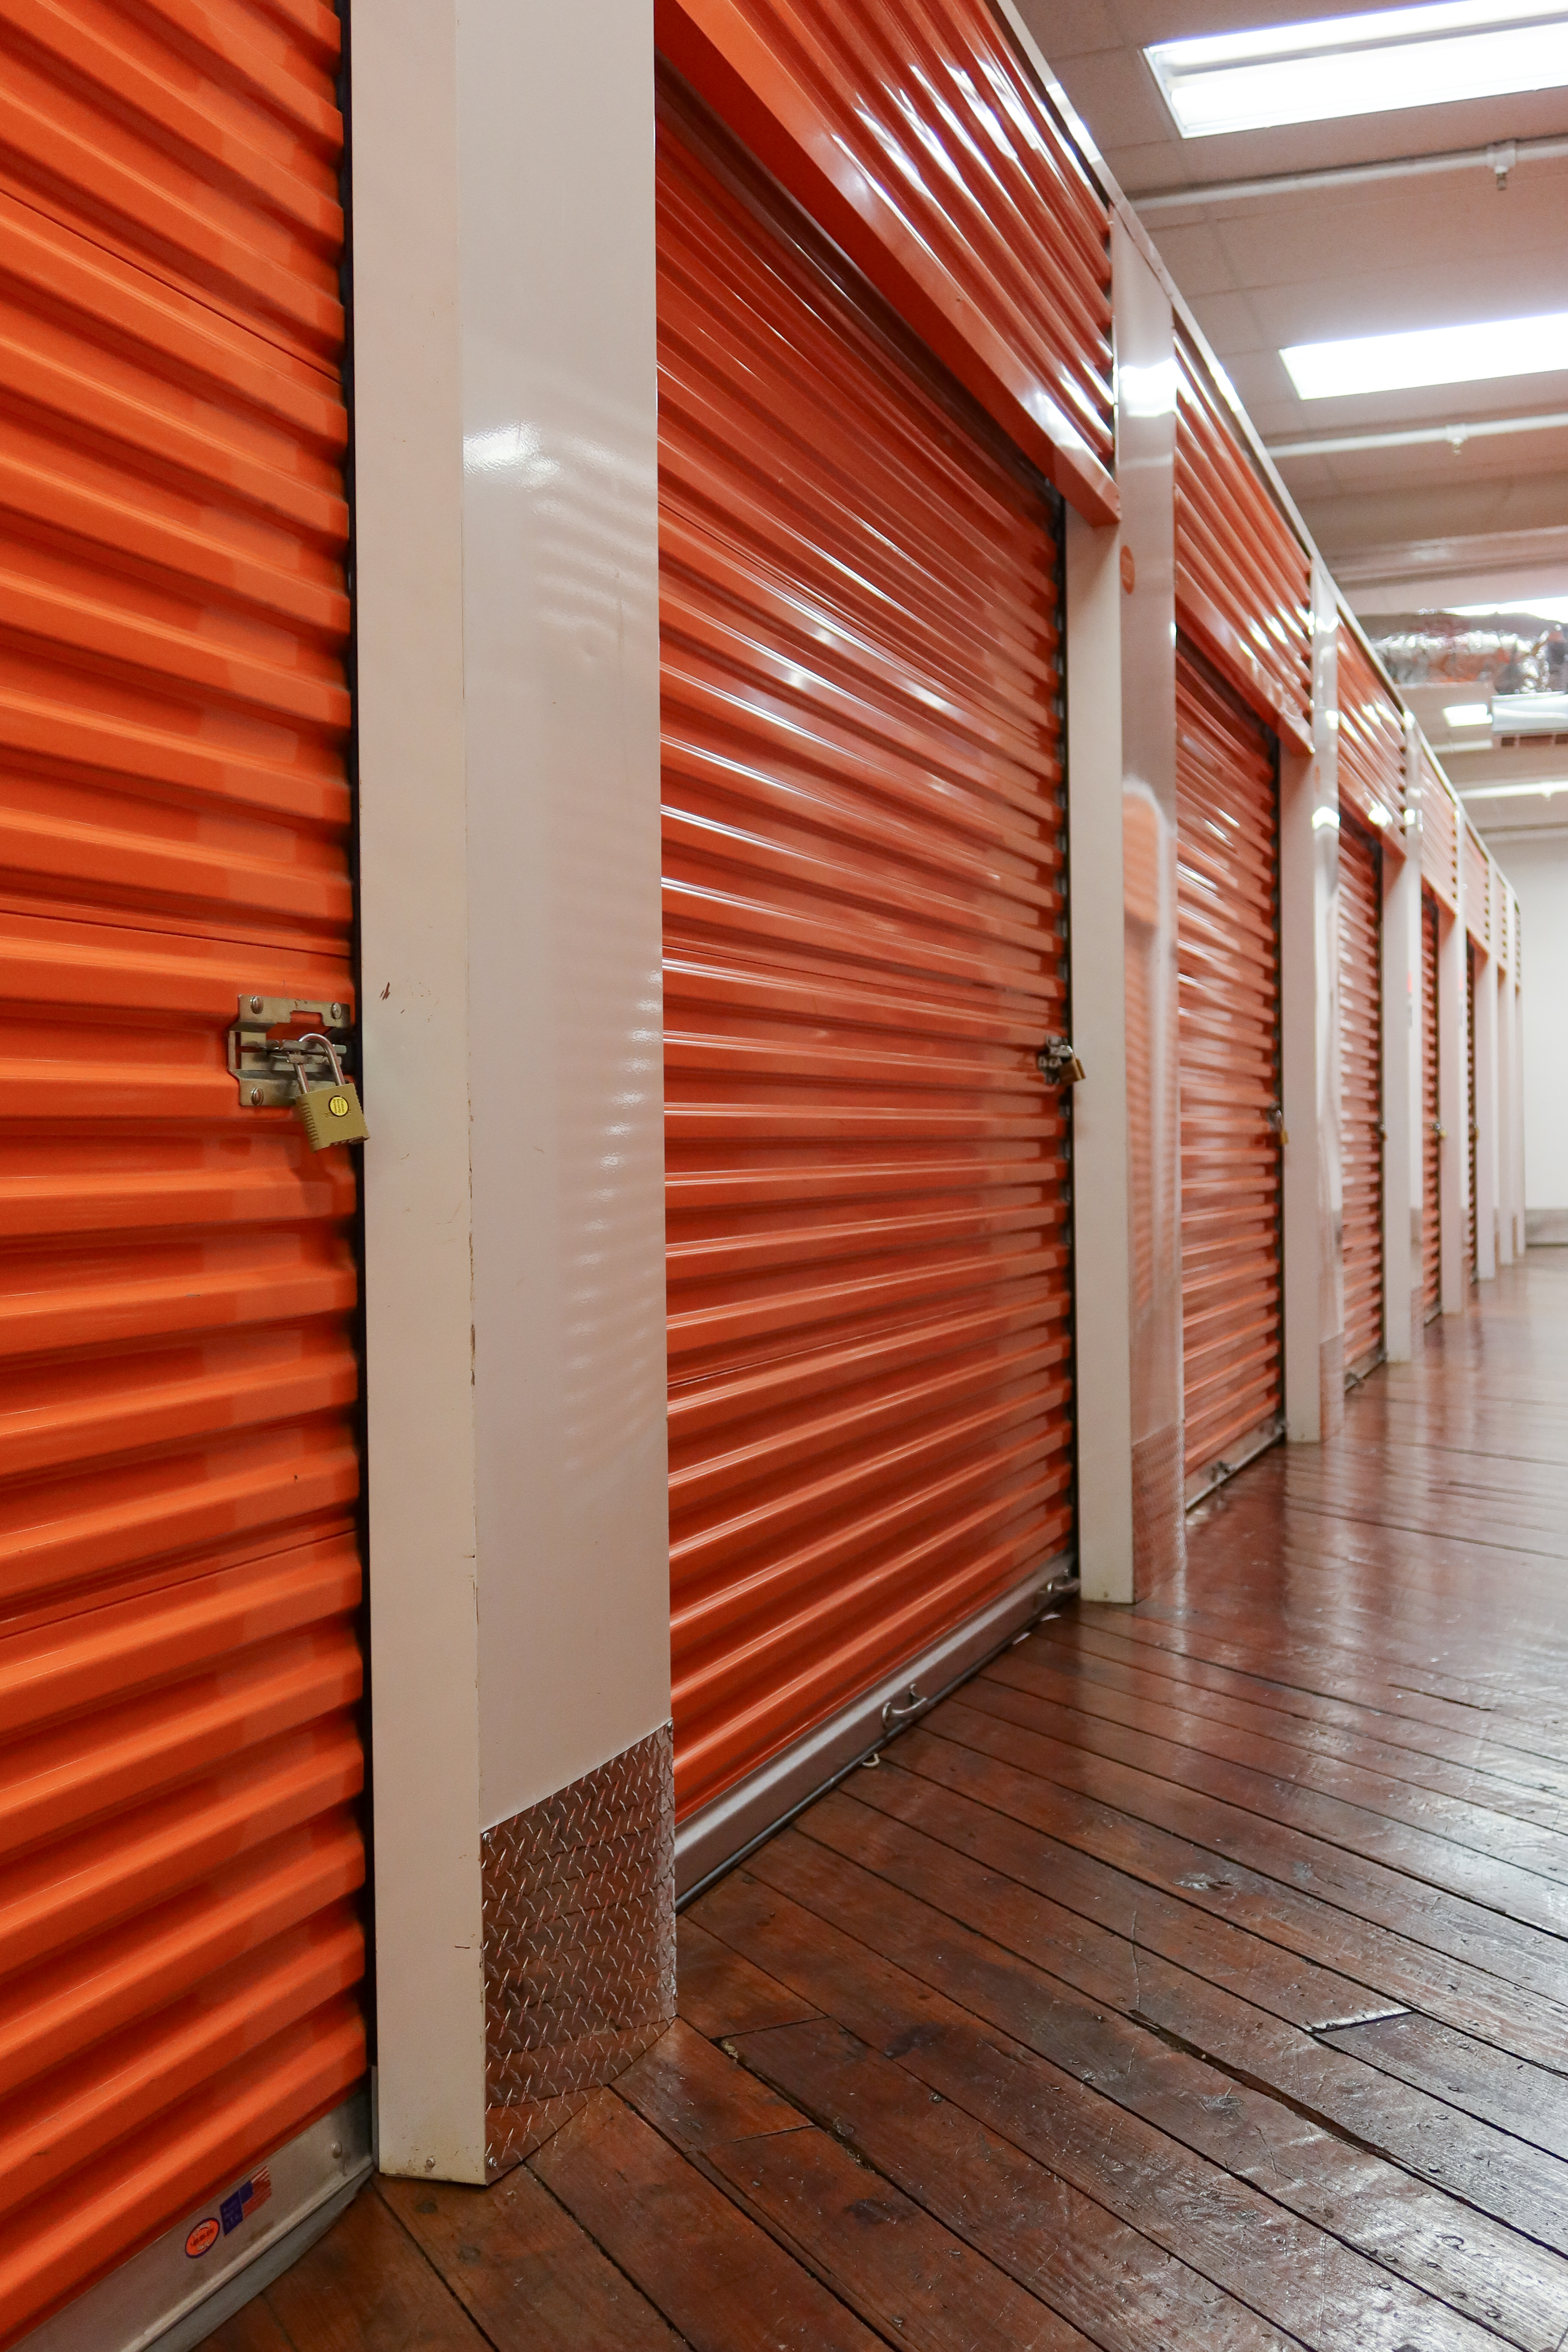 A row of orange roll-up storage unit doors with padlocks, set against a polished wooden floor and well-lit hallway.